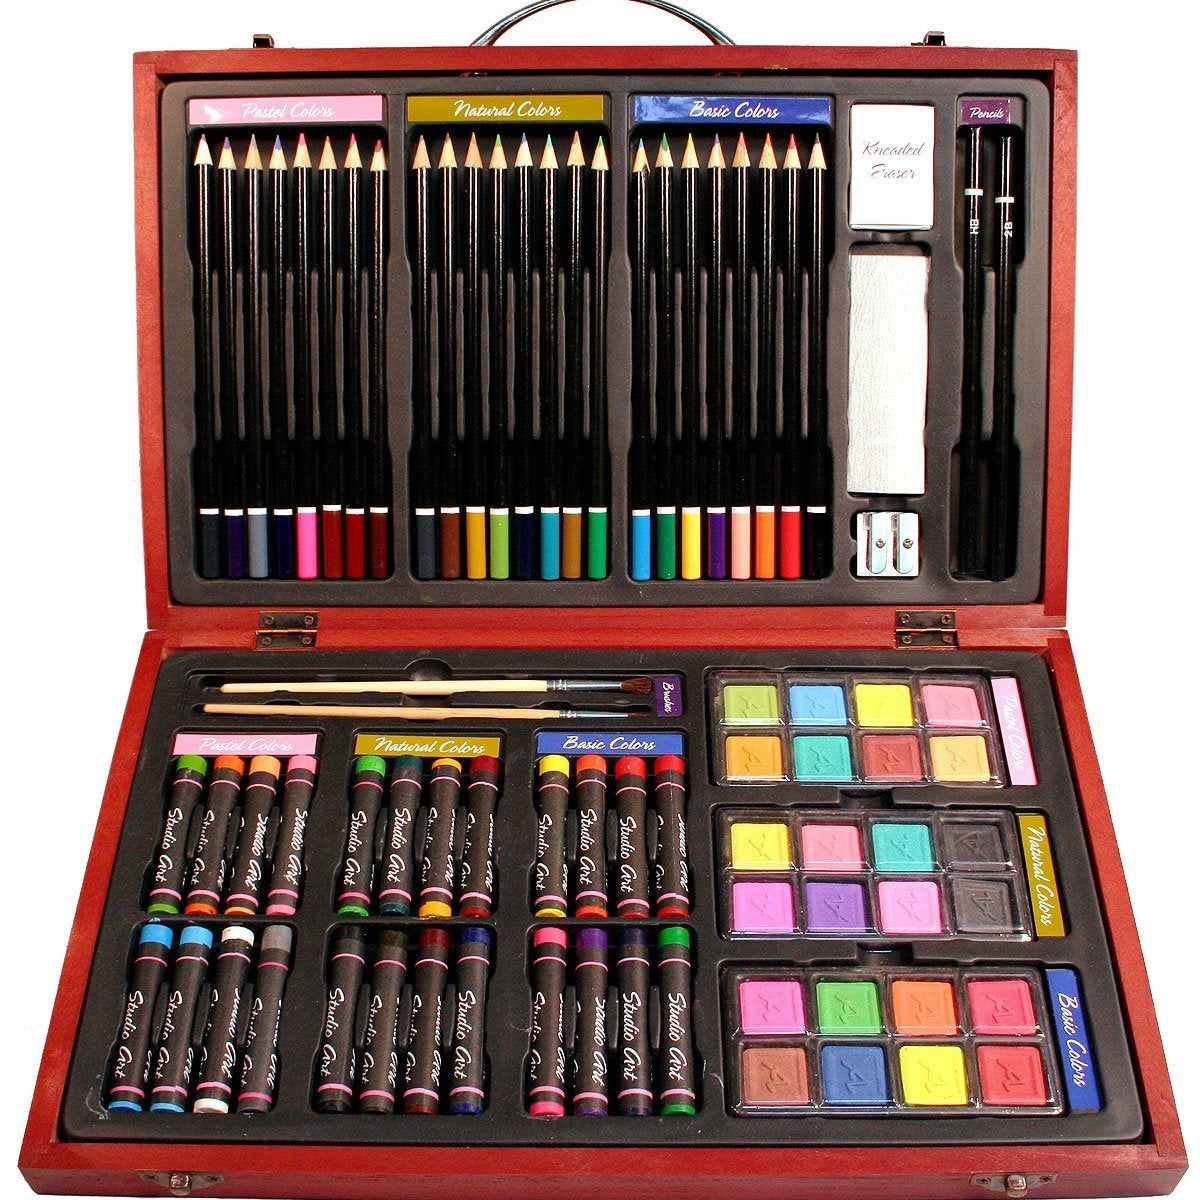 Art 101 USA Deluxe Art Set with 119 Pieces in a Wood Organizer Case,  Includes Color Pencils, Paints, brushes and palettes, Learning guides,  Portable